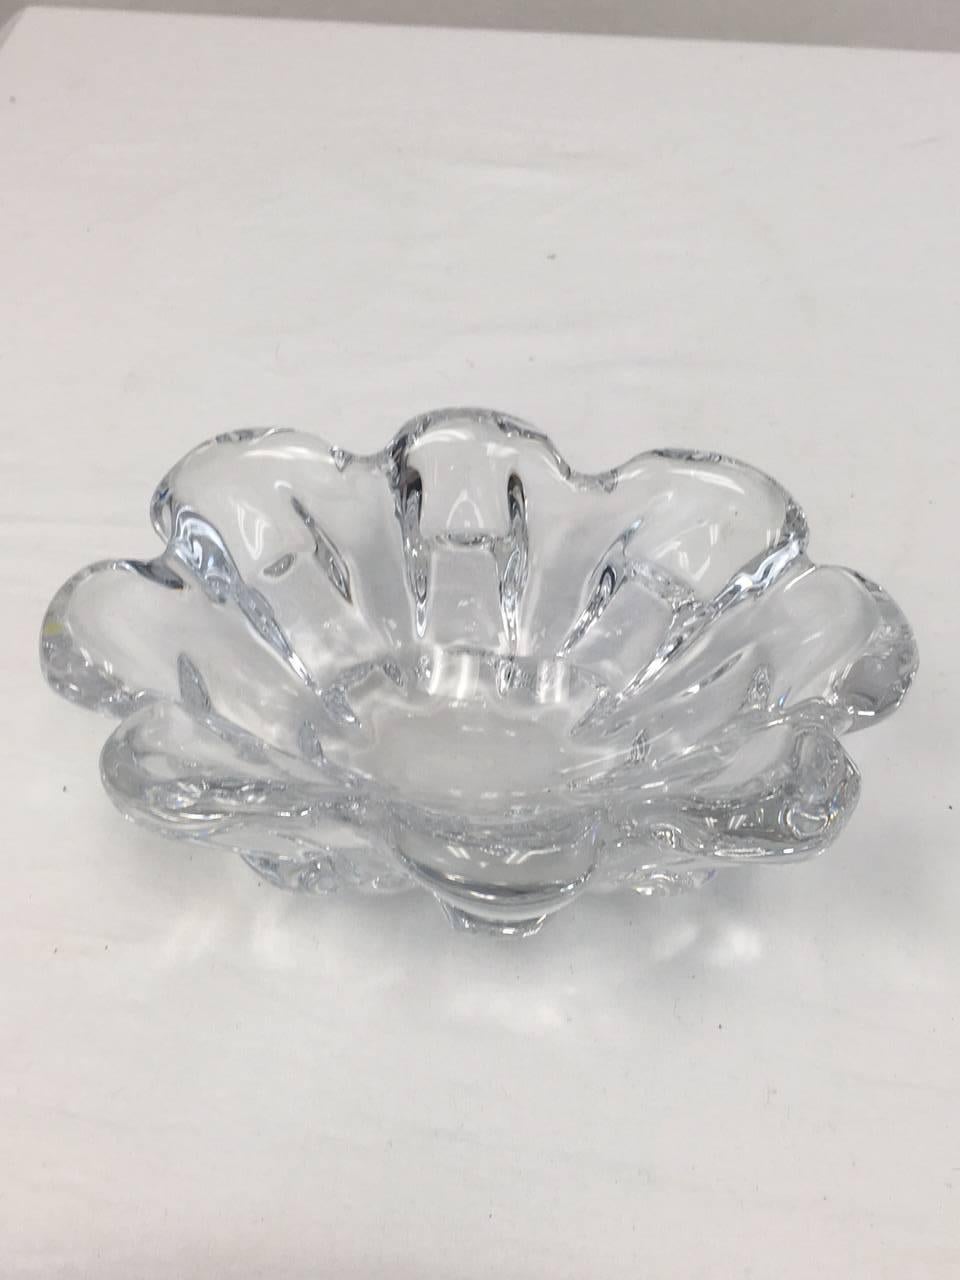 This Orrefors art bowl is flower shaped, heavy and in perfect condition. It is signed and numbered on the bottom, and is probably by designer Lars Hellsten.